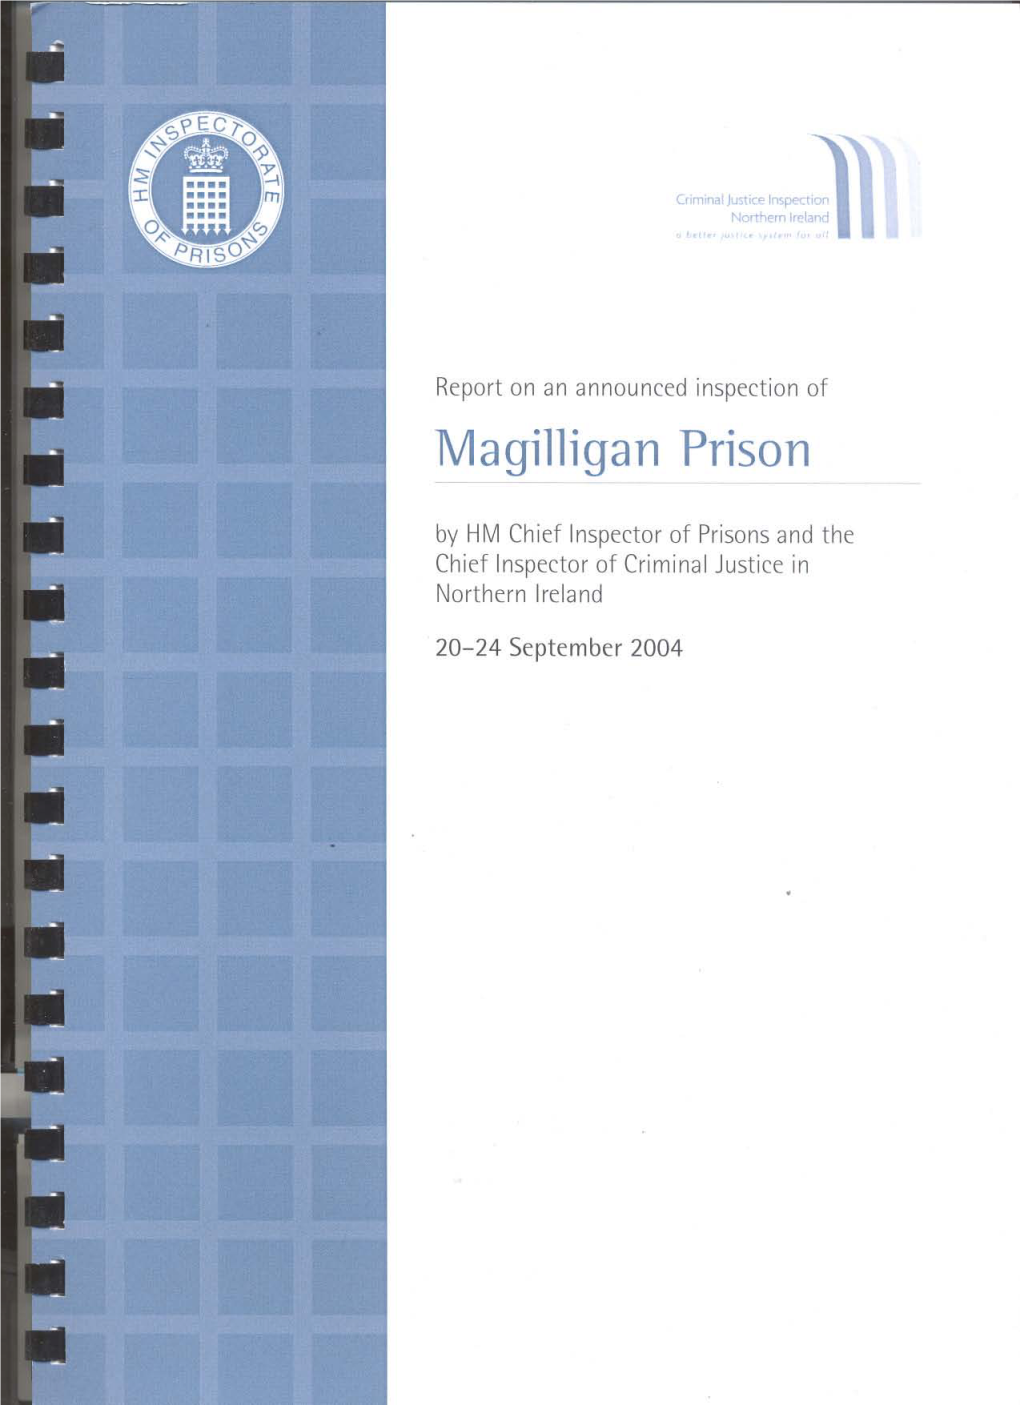 Magilligan Prison by HM Chief Inspector of Prisons and the Chief Inspector of Criminal Justice in Northern Ireland